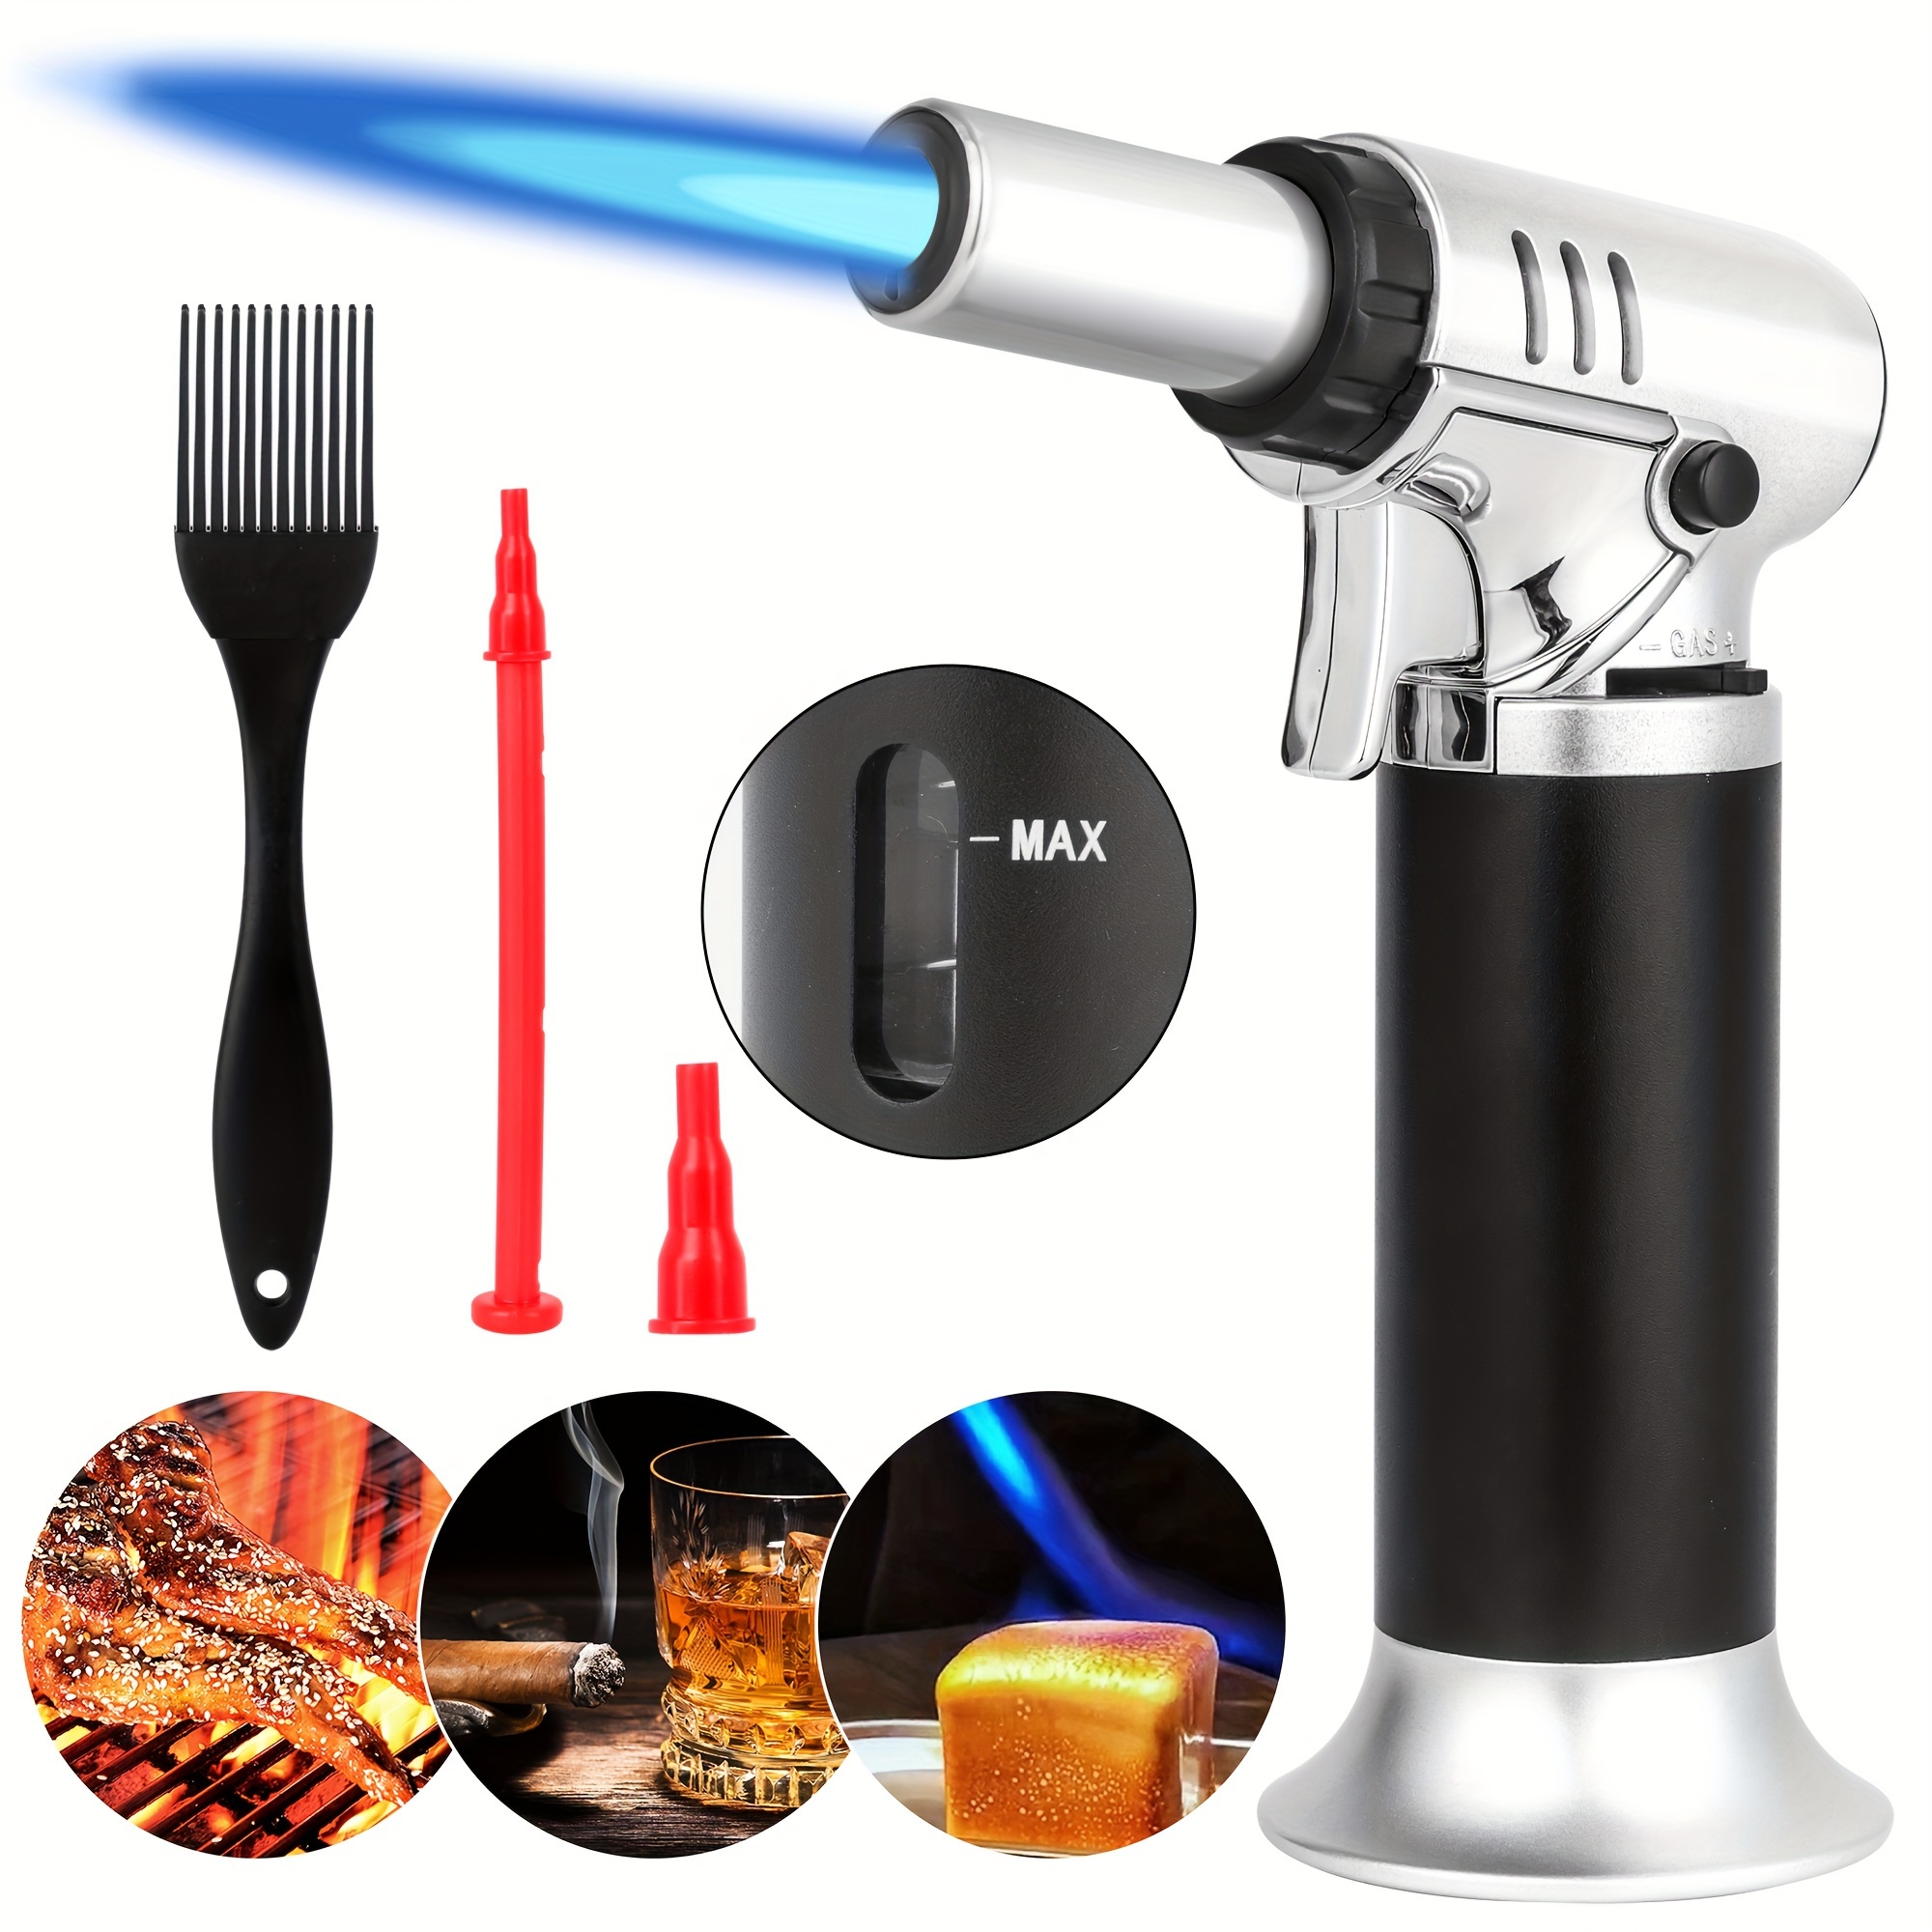 

Butane Torch With Fuel Gauge & Continuous Flame Lock, With Basting Brushes Silicone Kitchen Blow Torch, Creme Brulee, Mini Torch For Cooking And Crafts (butane Gas Not Included)